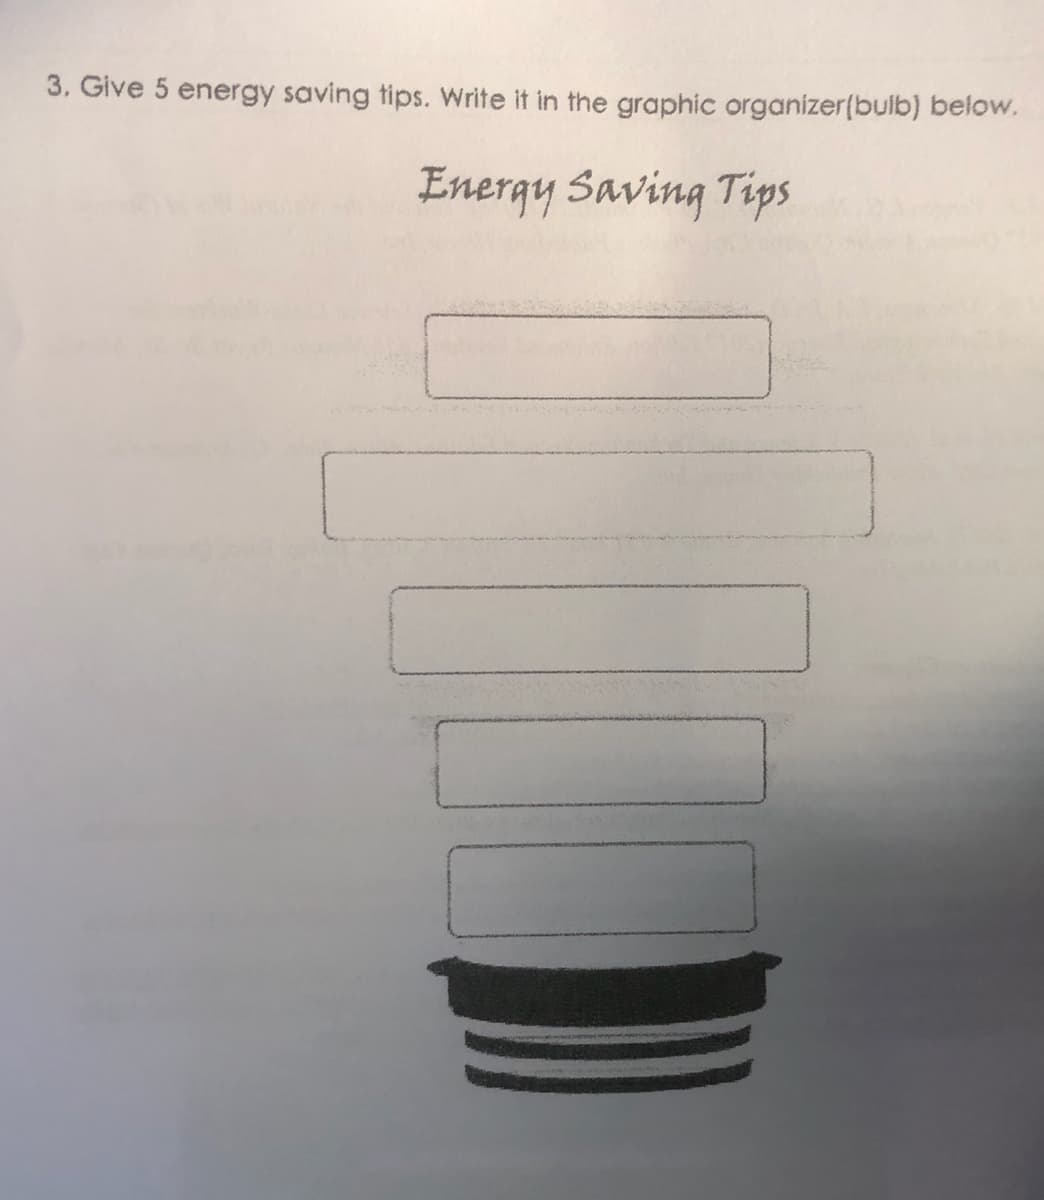 3. Give 5 energy saving tips. Write it in the graphic organizer(bulb) below,
Energy Saving Tips
